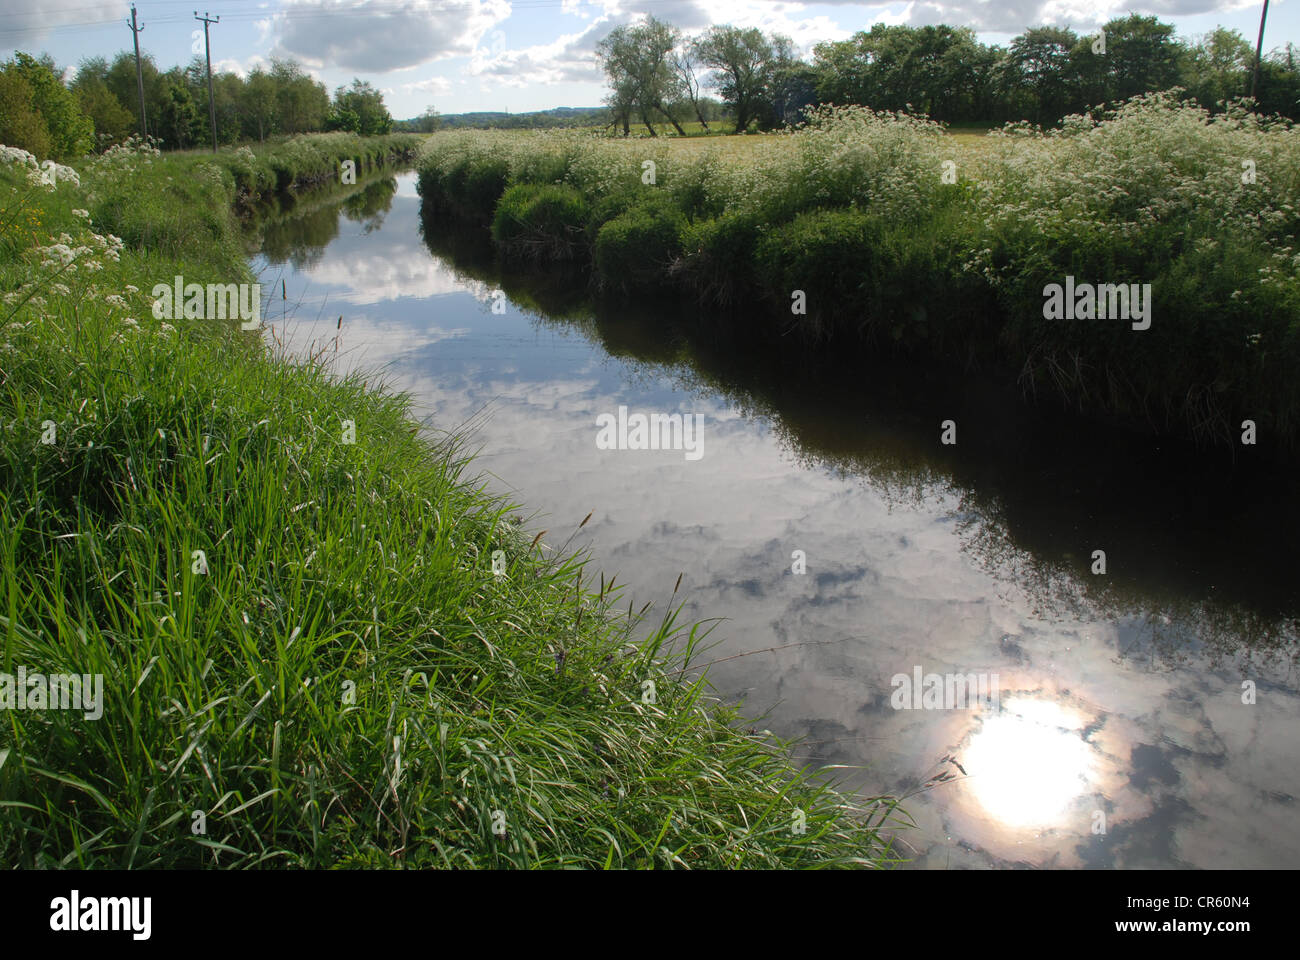 The Six Mile river in County Antrim on a summer evening. Picture by: Adam Alexander/Alamy Stock Photo